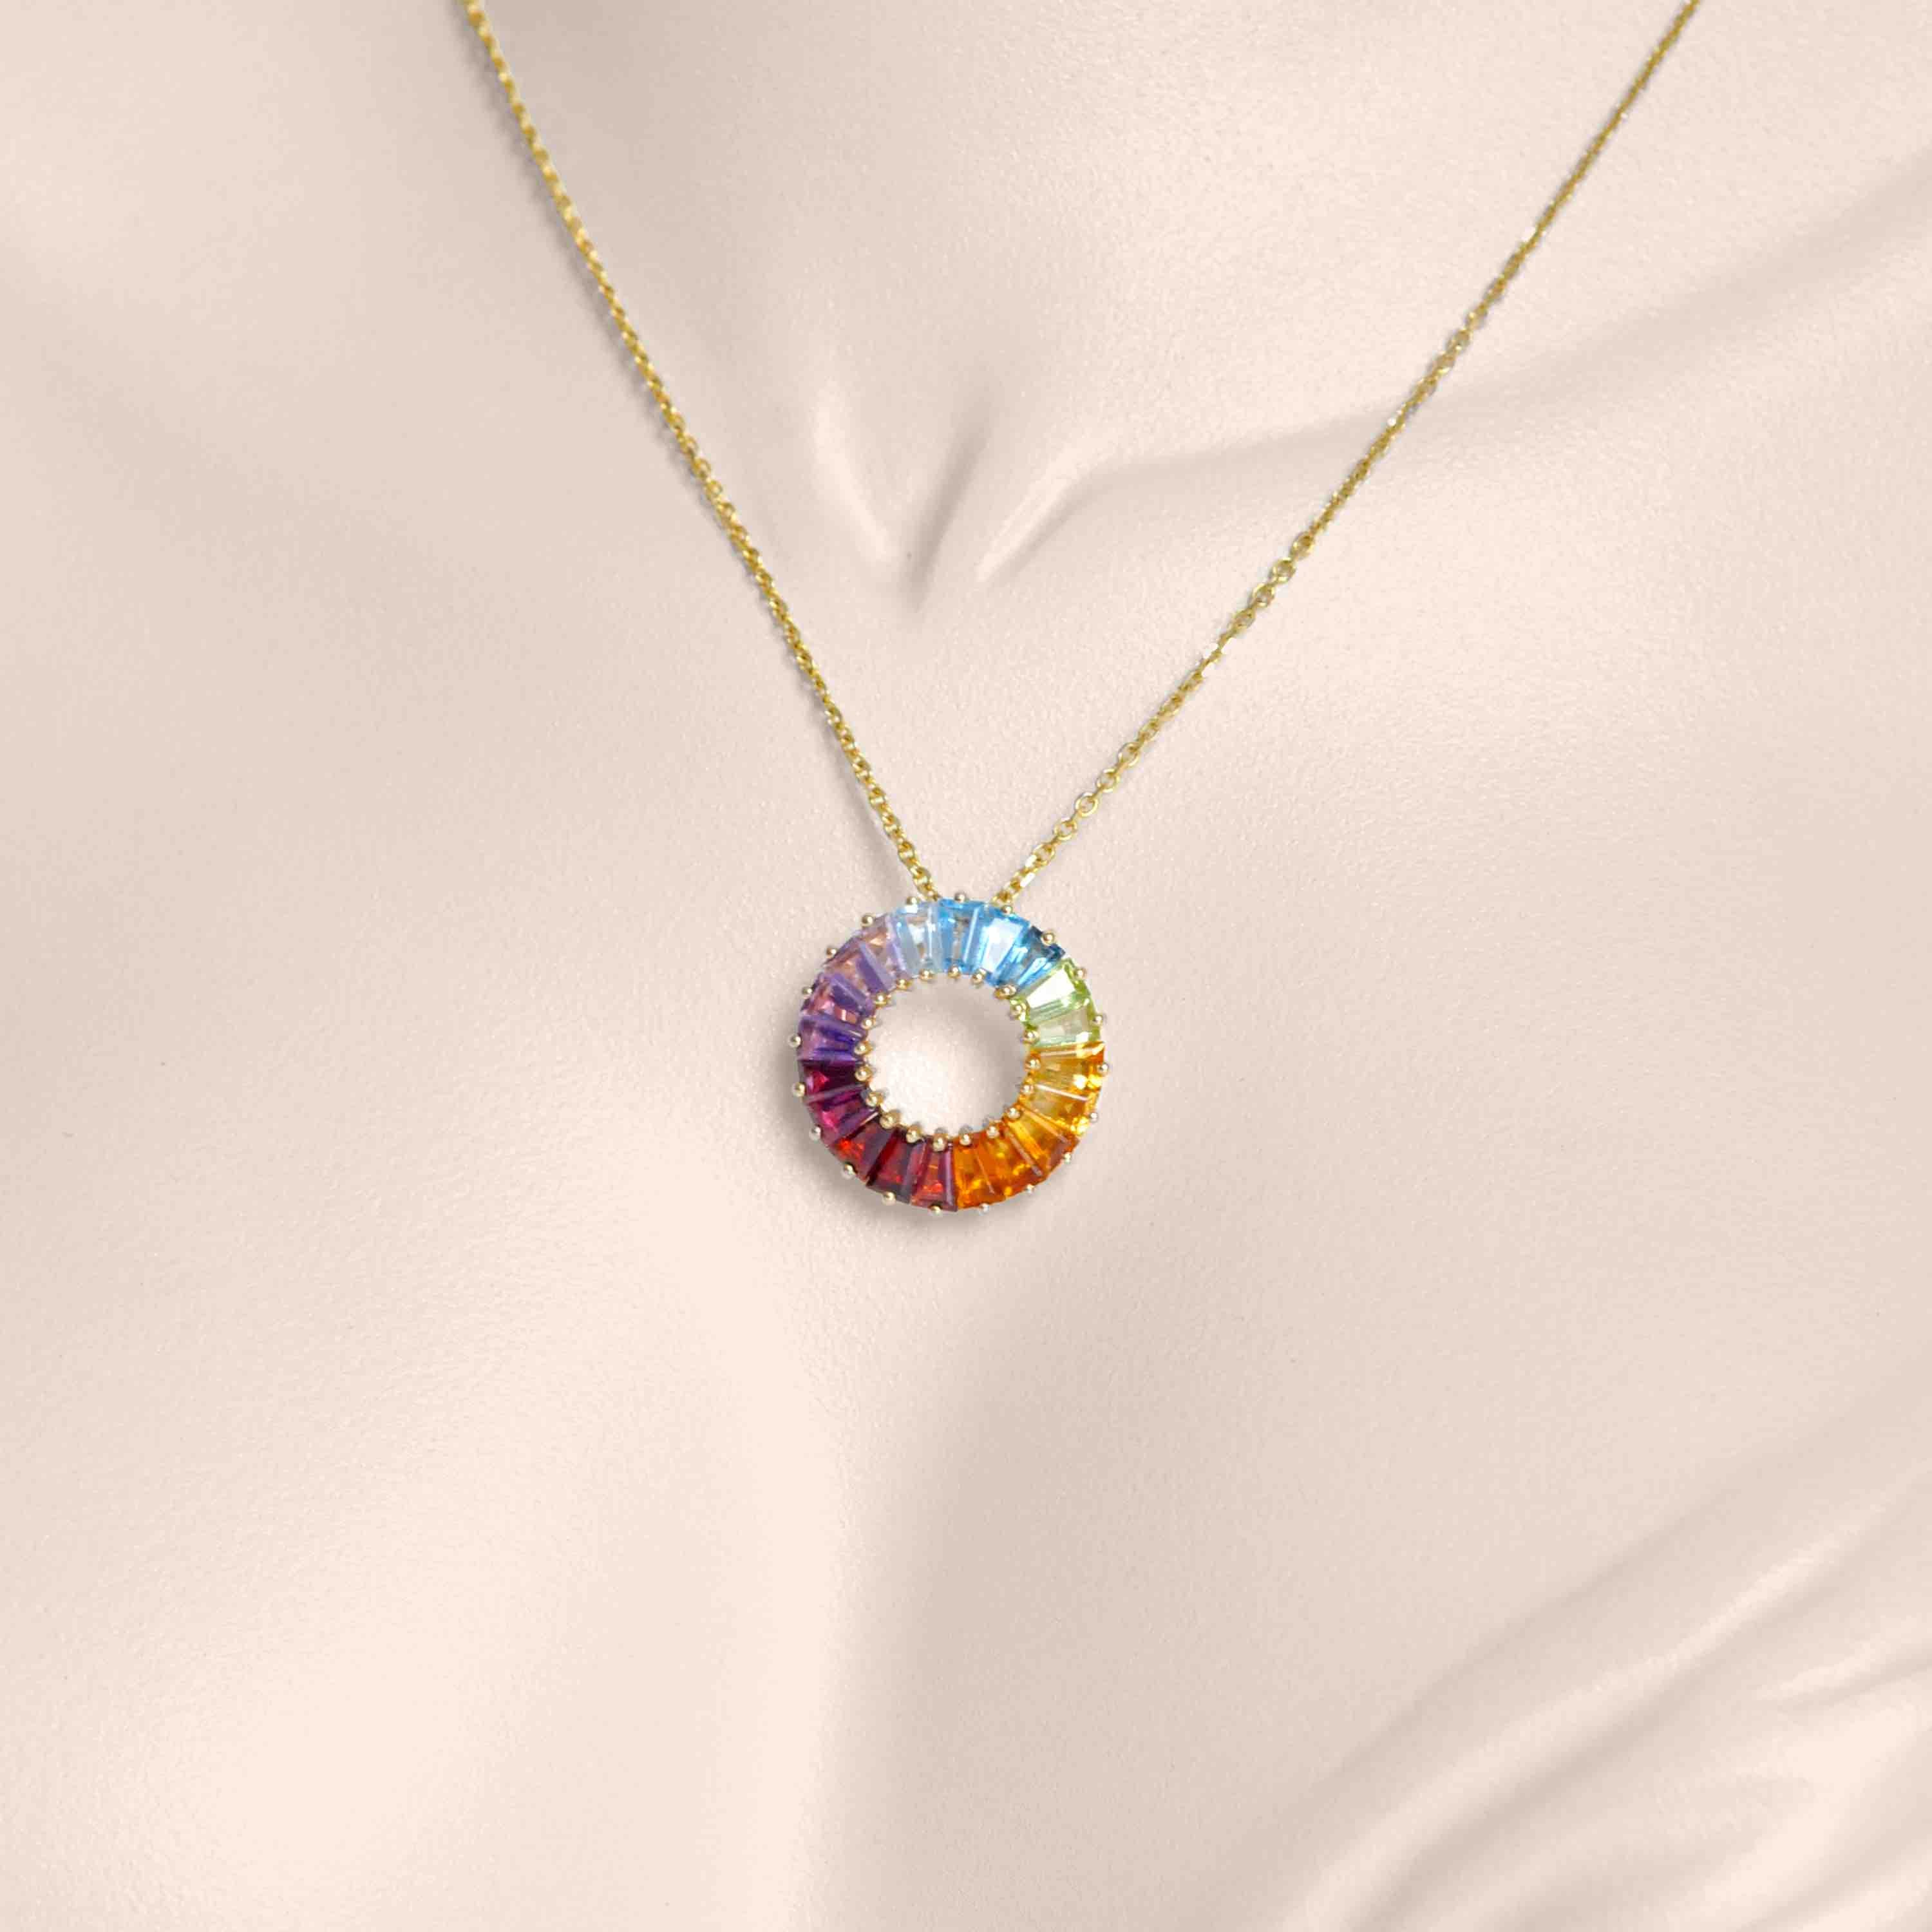 Buy DULCI® Rainbow Color Changing Crystal Glass Hanging Heart Valentine's  Day Necklace Chain Pendant Jewelry for Women Girl's at Amazon.in